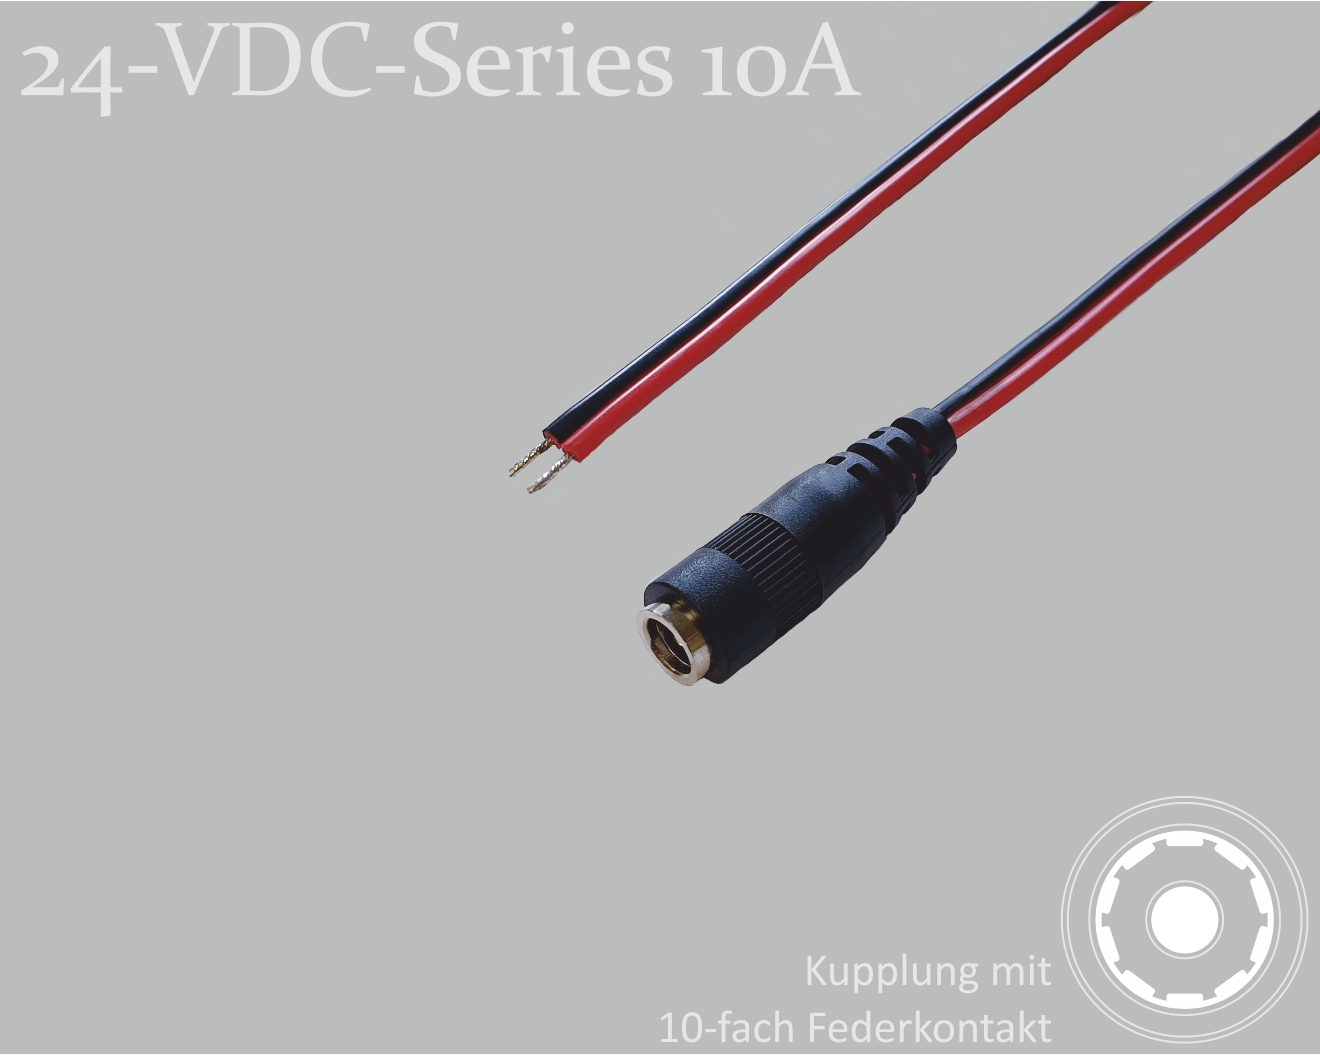 24-VDC-Series 10A, DC connection cable, DC coupling with 10-spring contact 2.5x5.5mm, flat cable 2x0.75mm², red/black, tinned ends, 0.75m